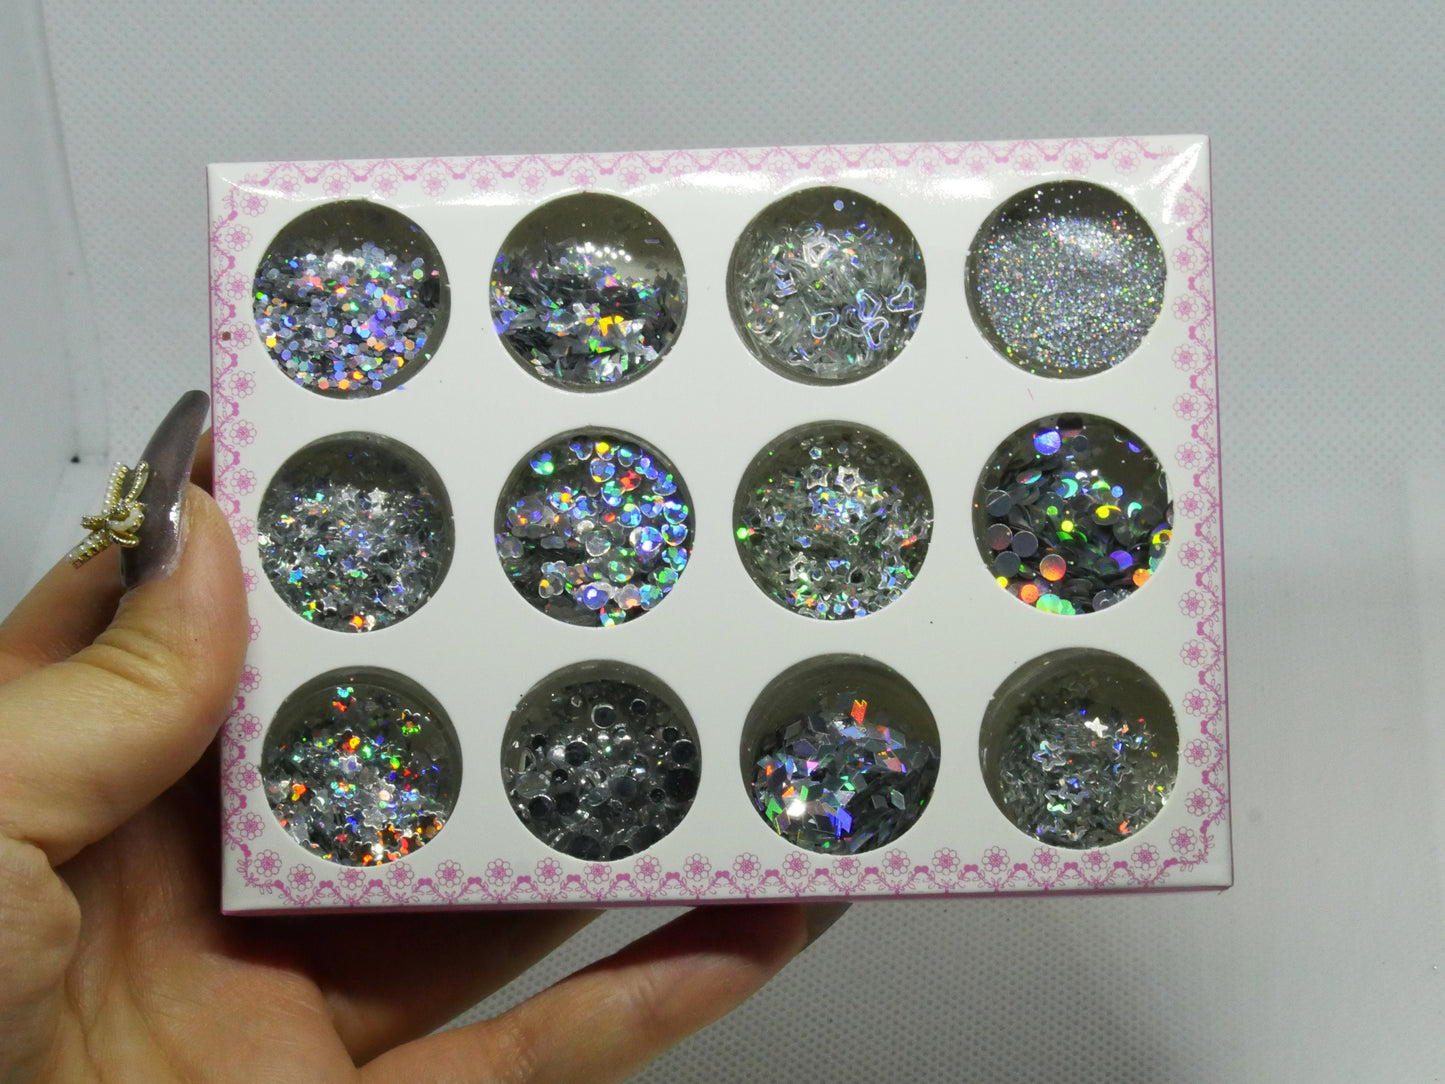 12 jars Mixed Starry Holographic Laser Glitter Dust Nail Powder Sequins Manicure Nail Art DIY Sparkles Decor for UV gel make up crafts